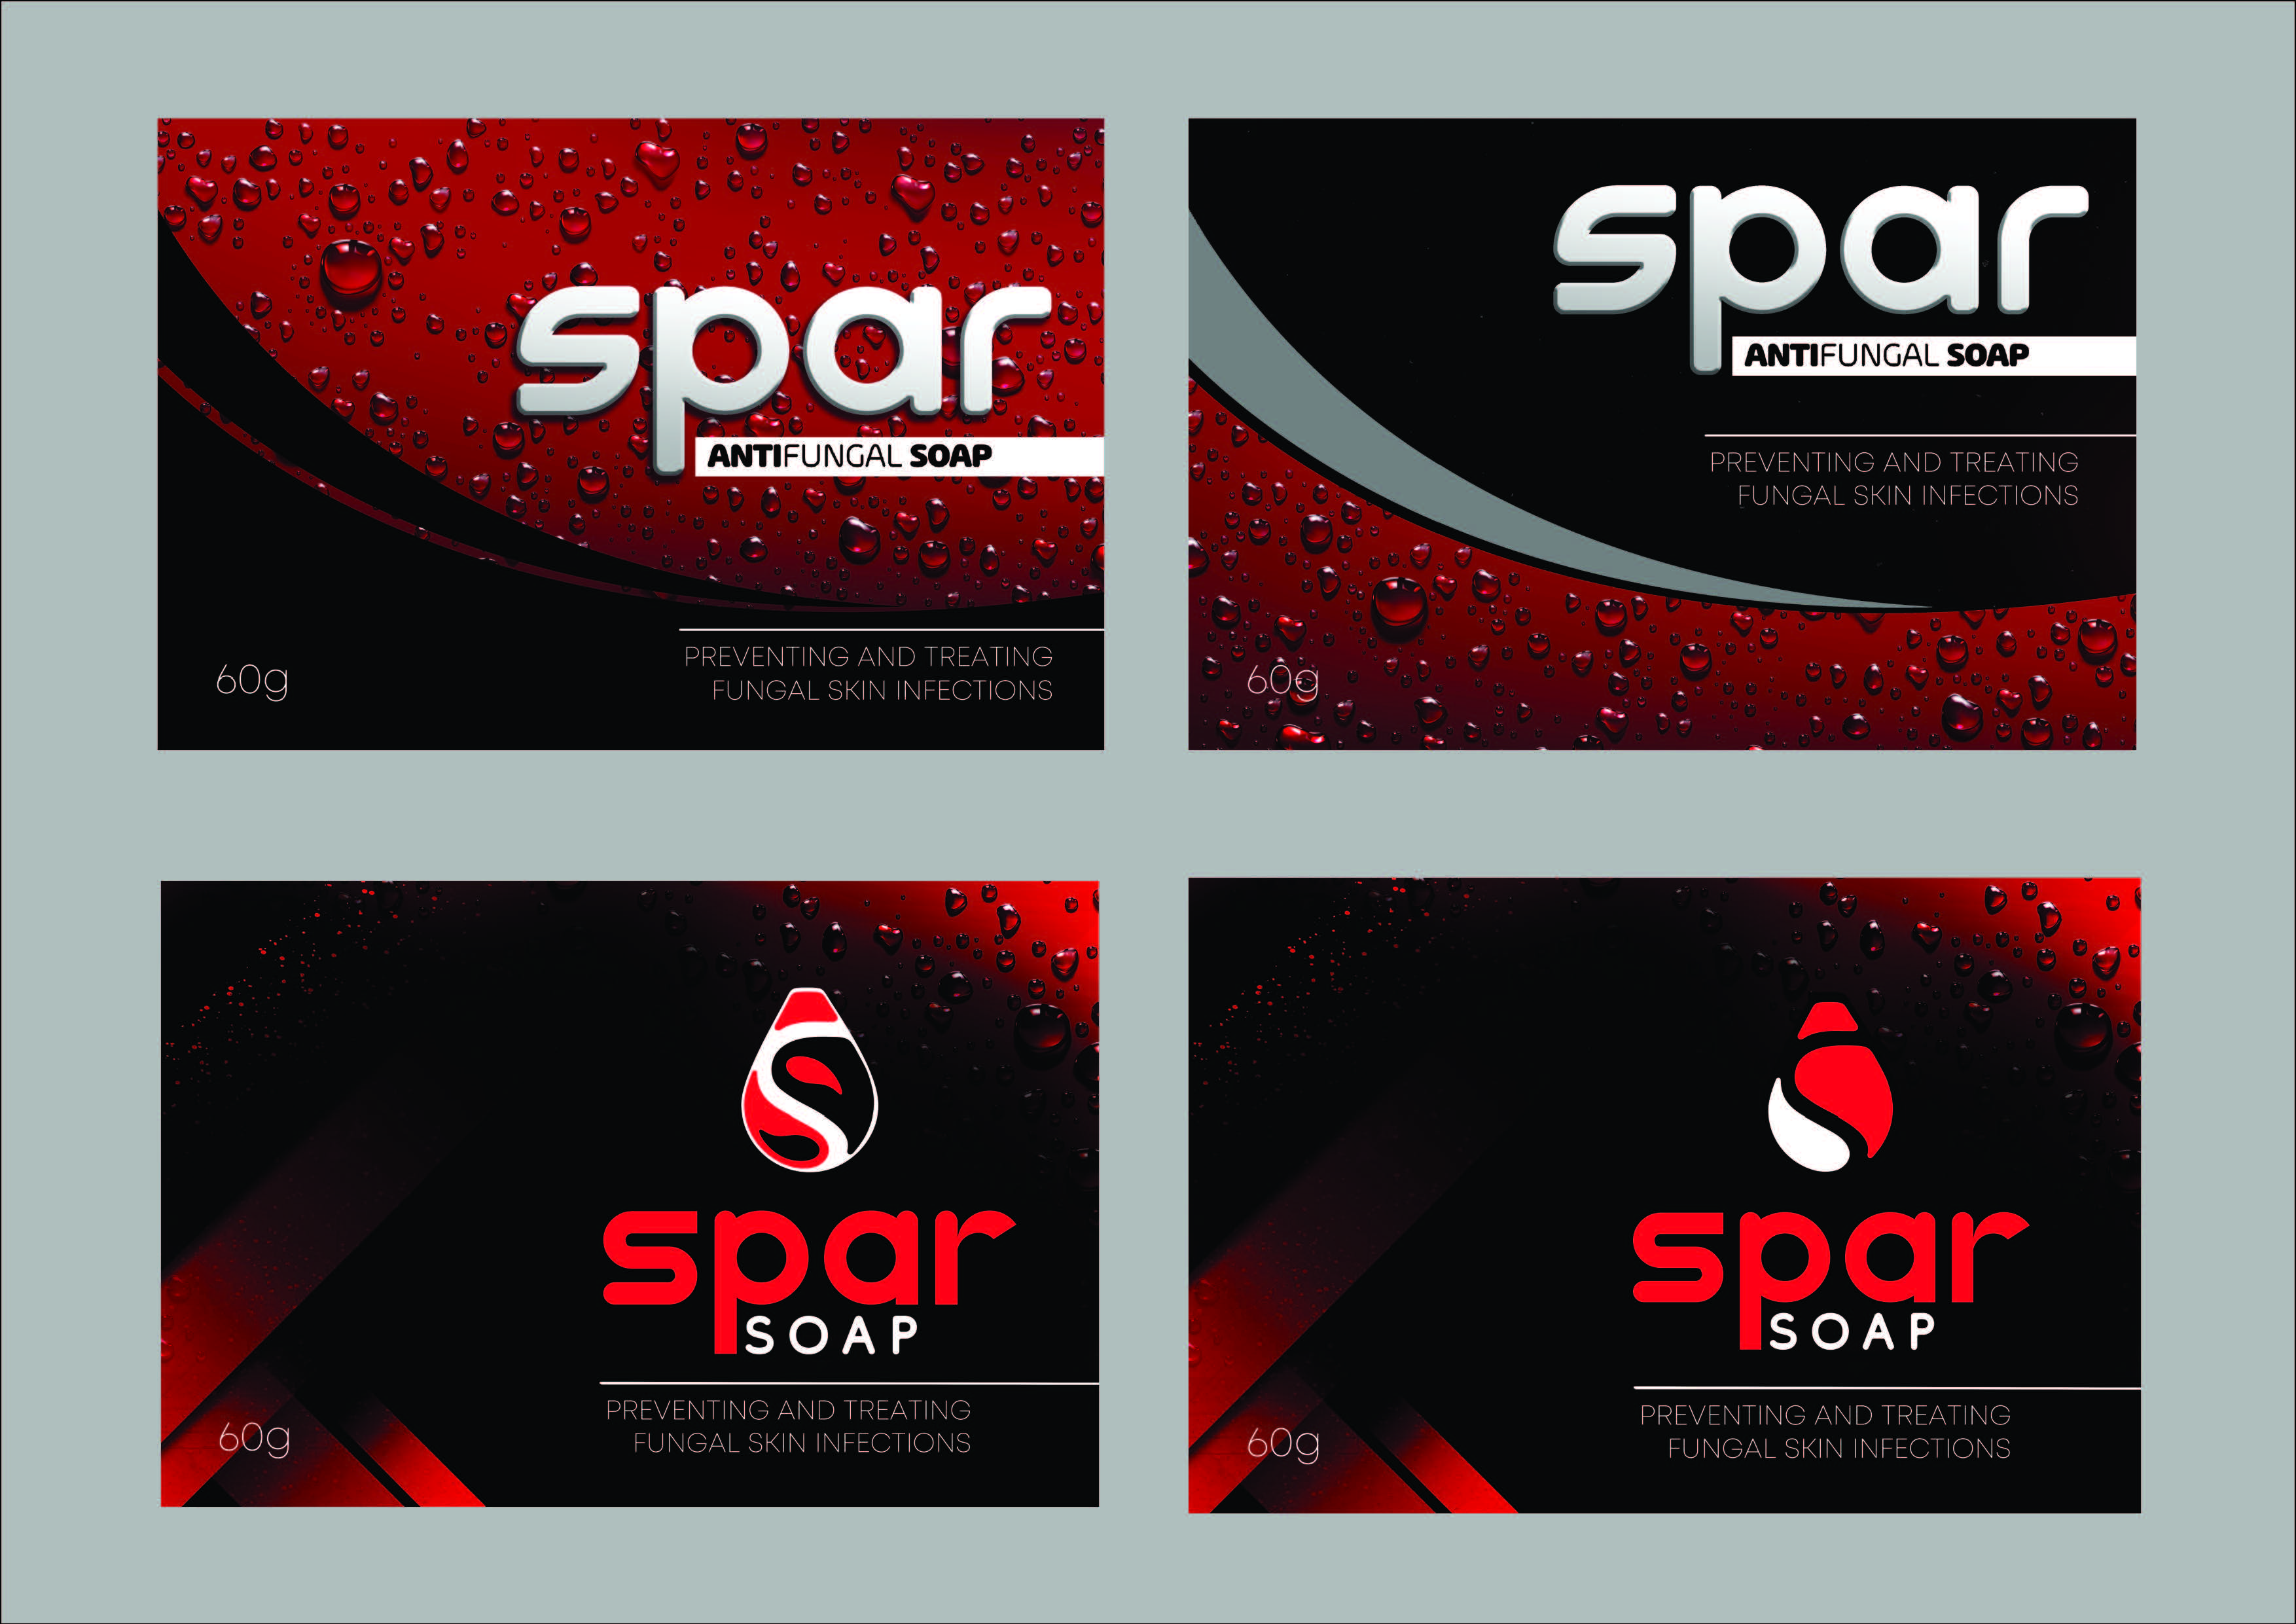 SparSoap Early Packaging Study & Research